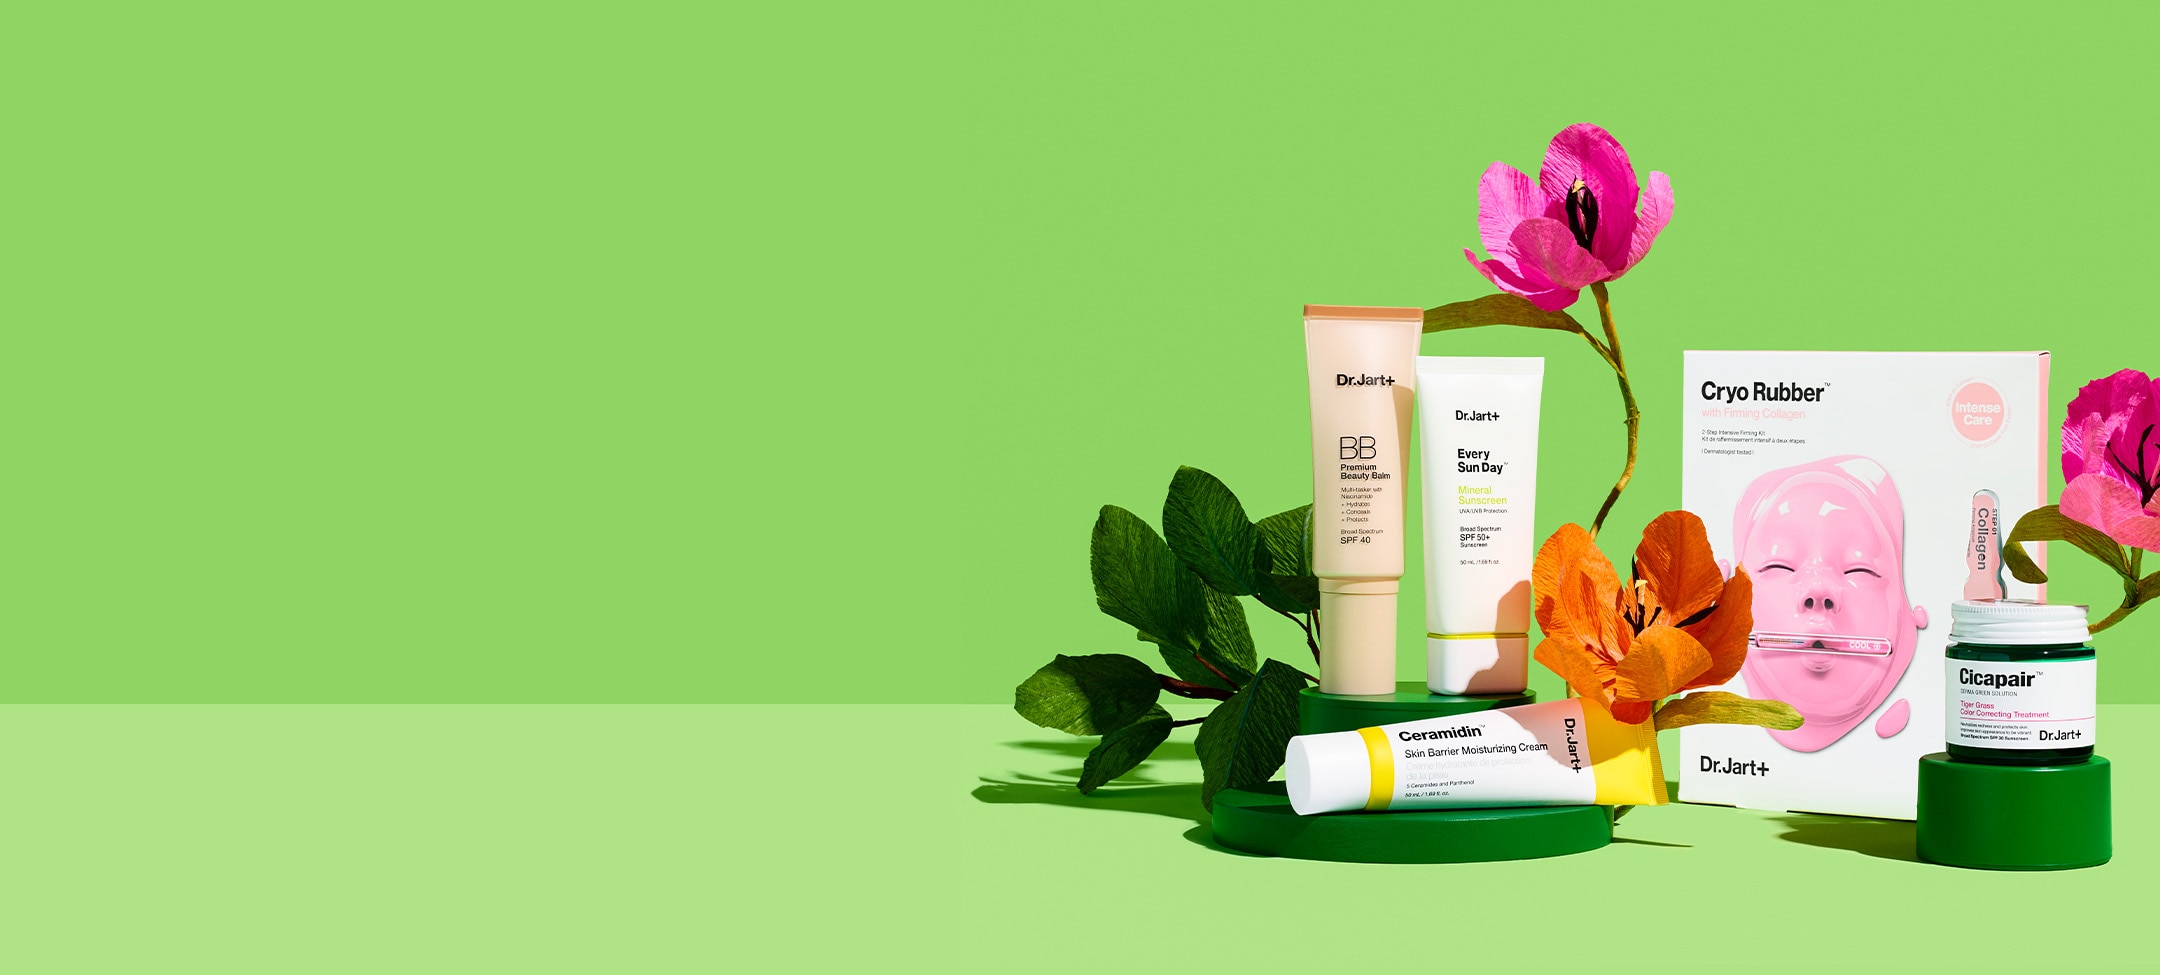 Dr.Jart+ bestselling moisturizers, mask and face sunscreen displayed alongside brightly colored flowers